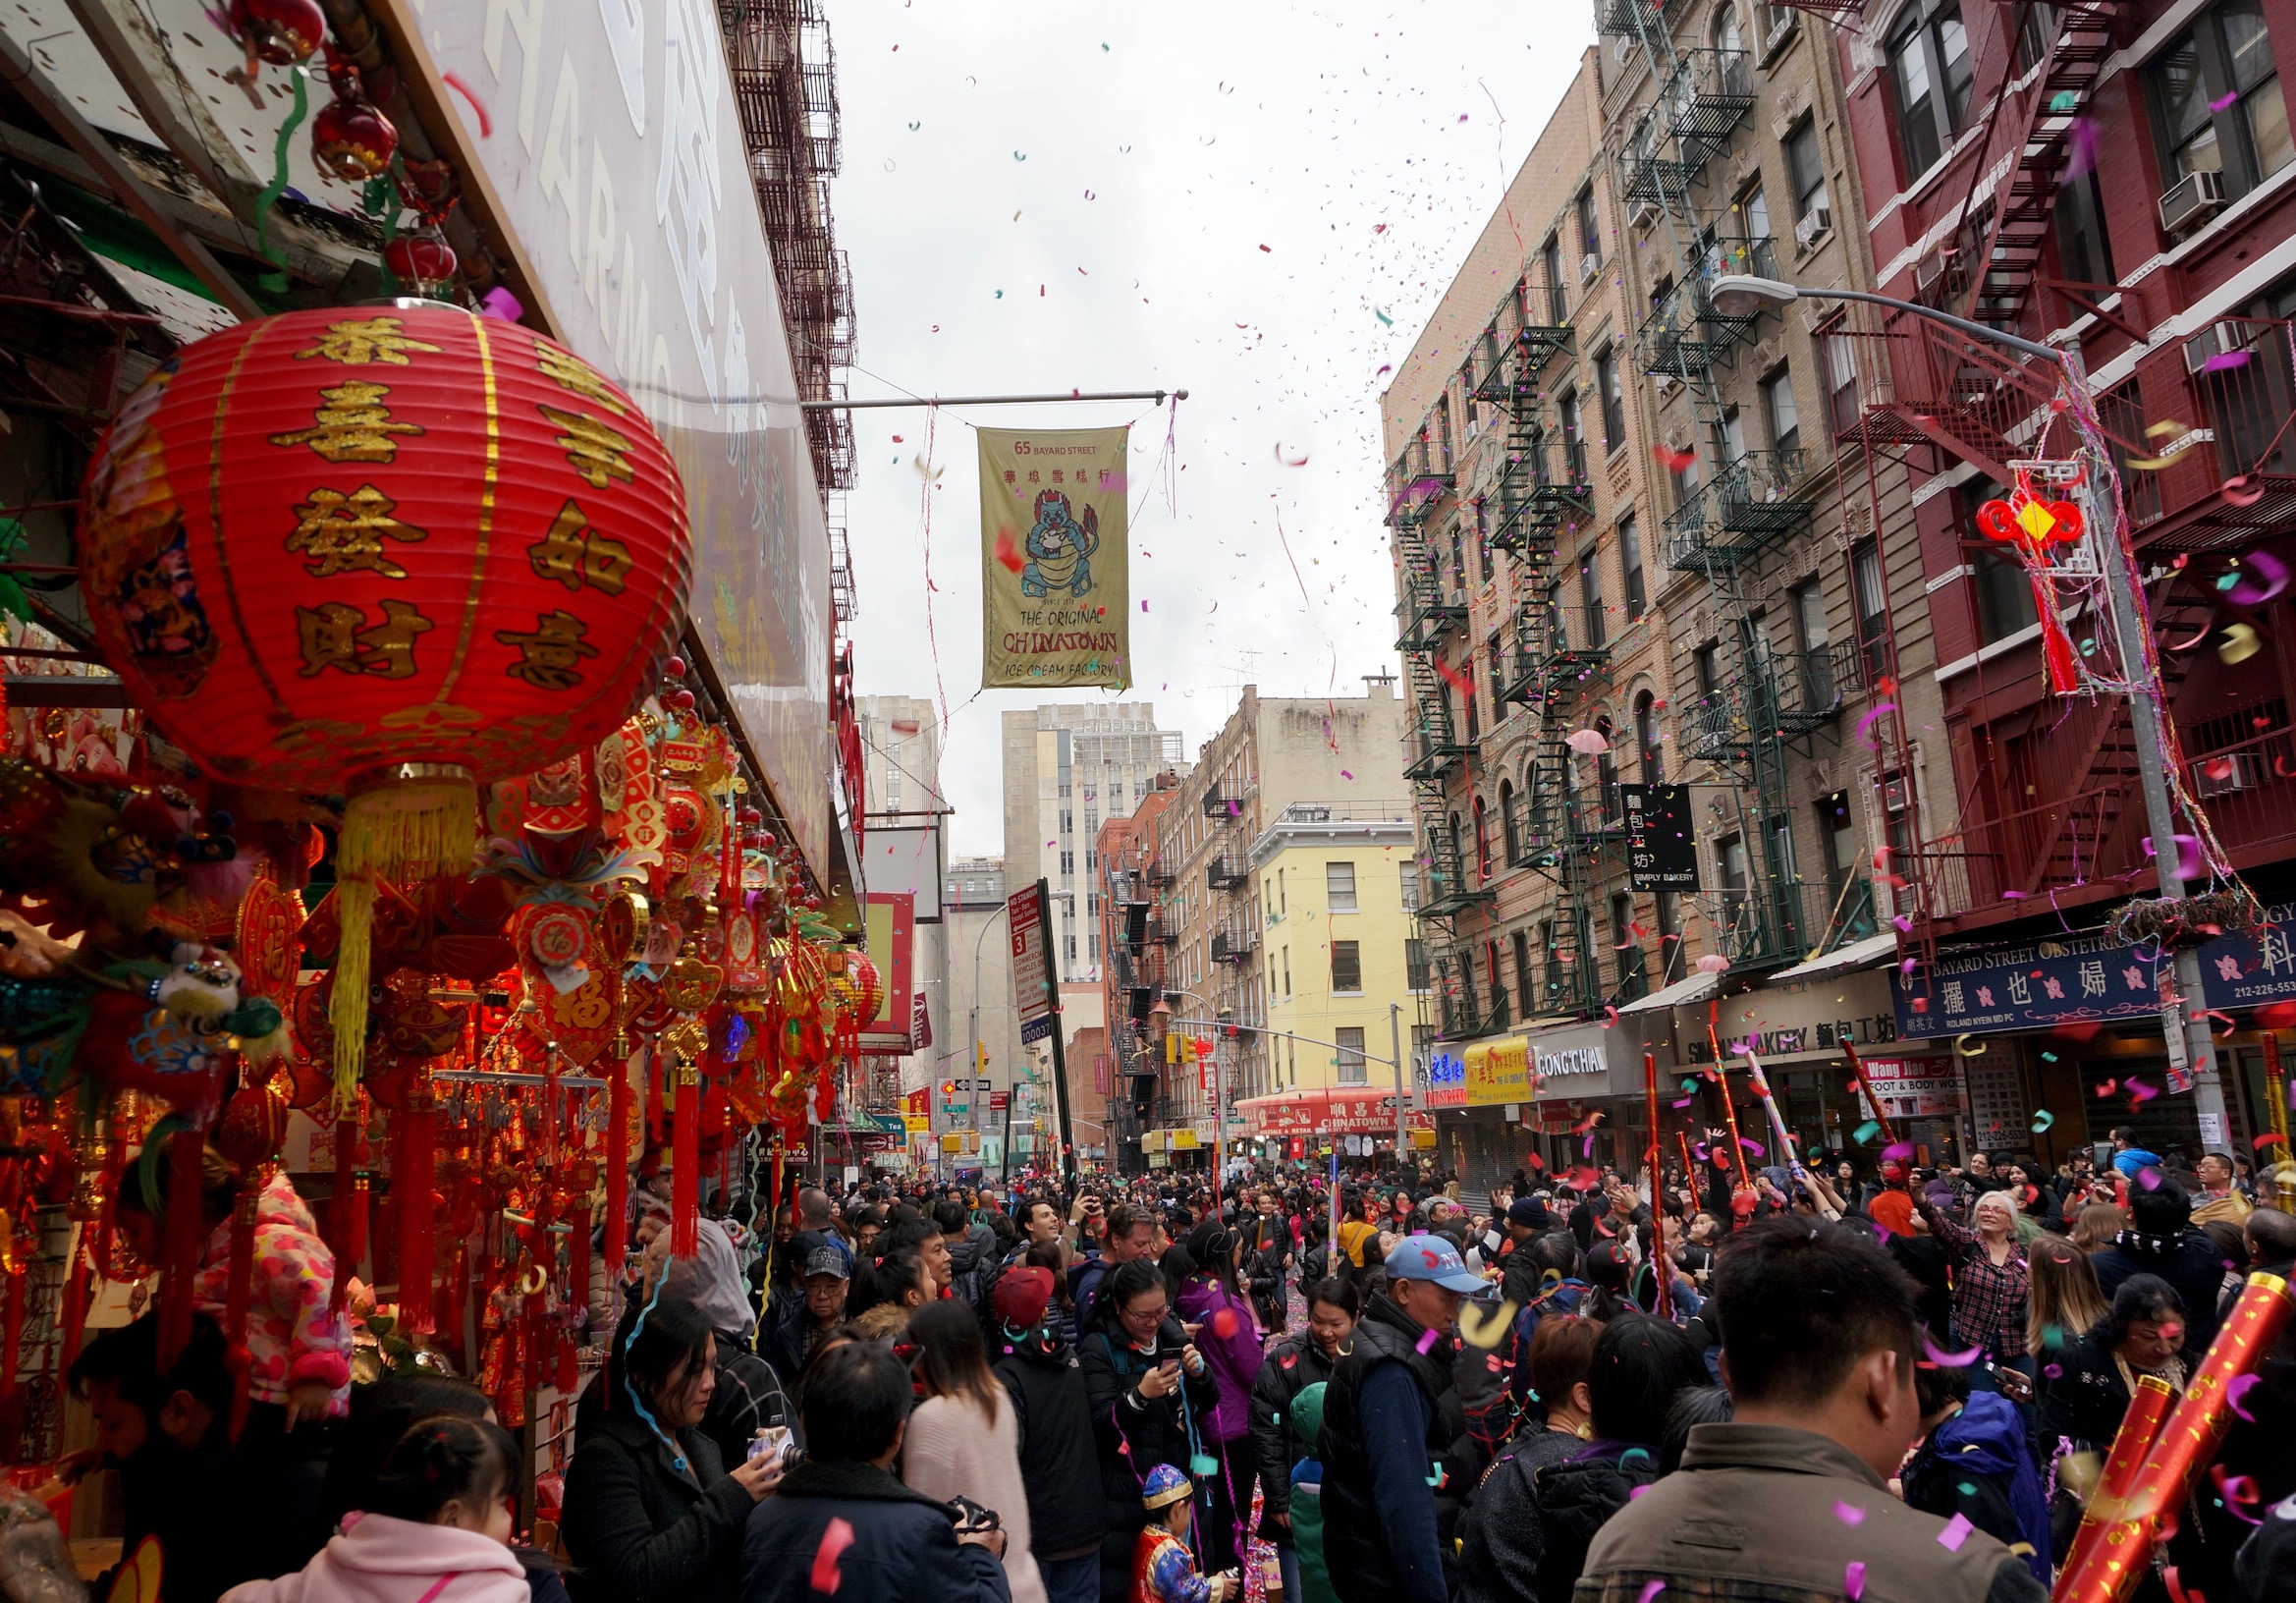 NY Cliché of the Day: Lunar New Year Celebrations in Chinatown NYC - New York Cliché2338 x 1632